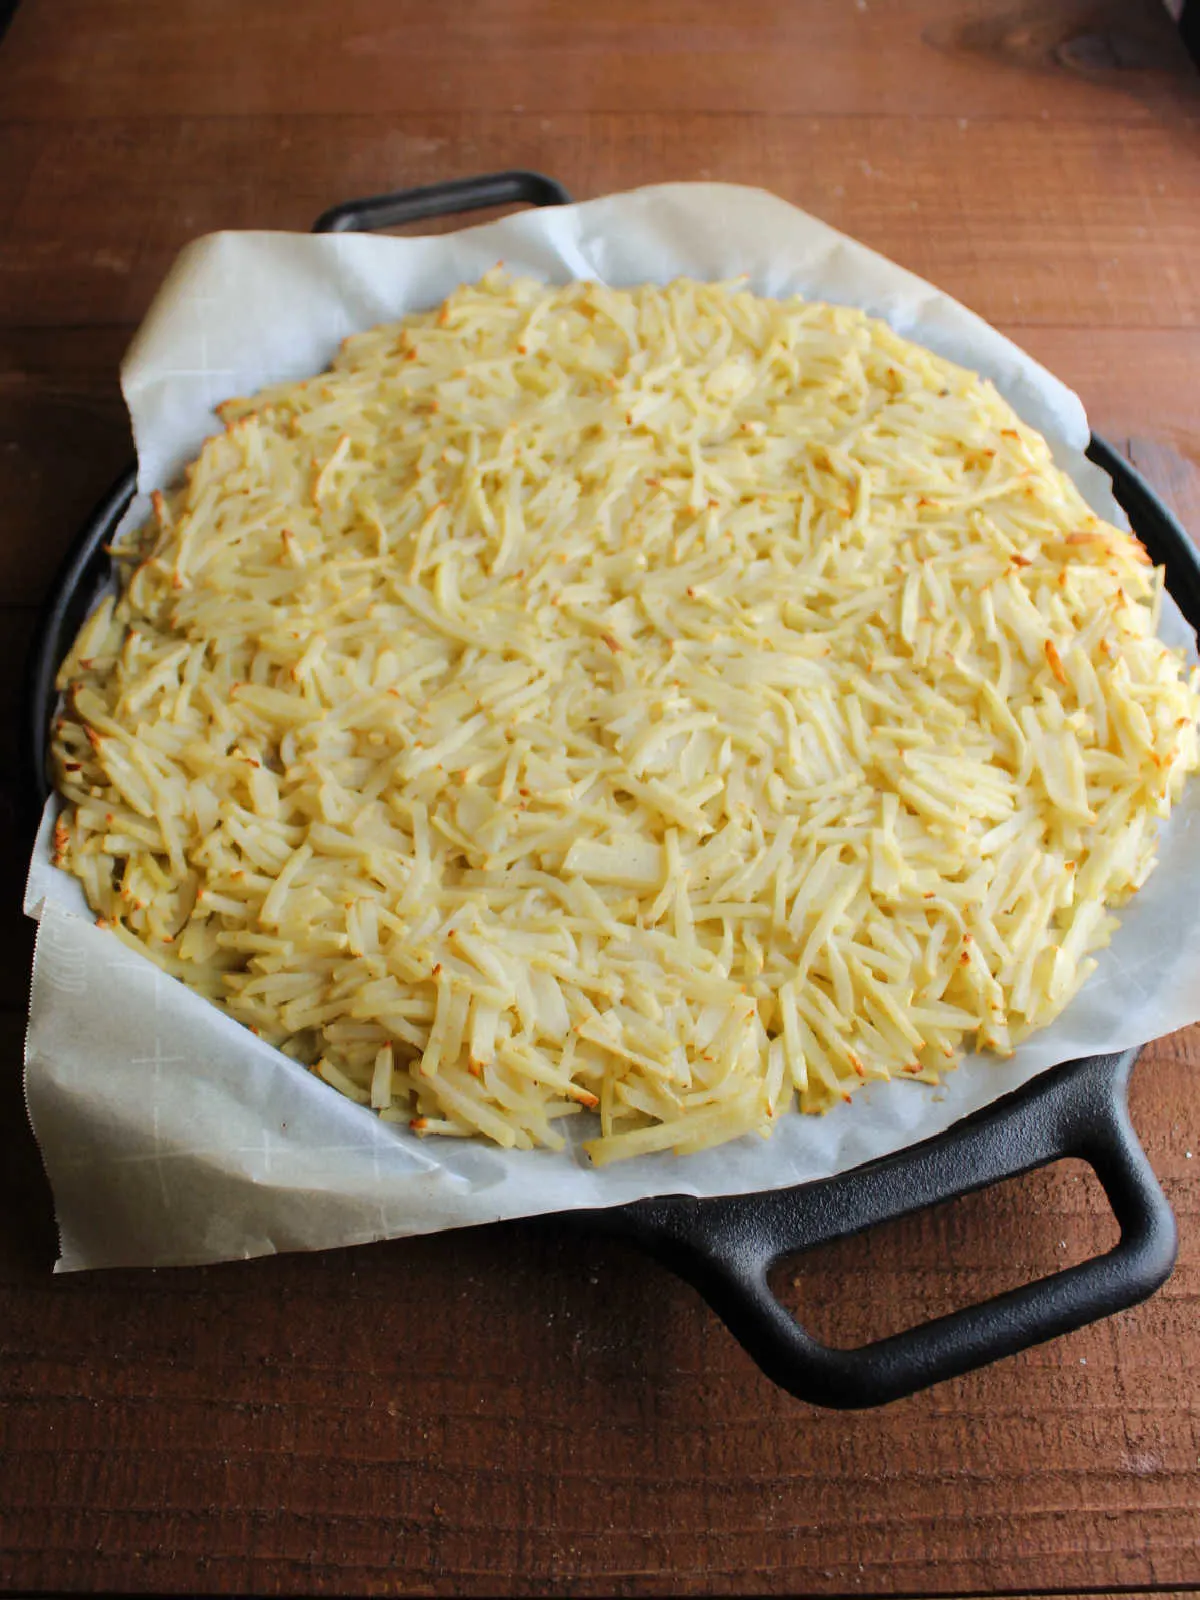 Hash brown pizza crust ready for toppings.